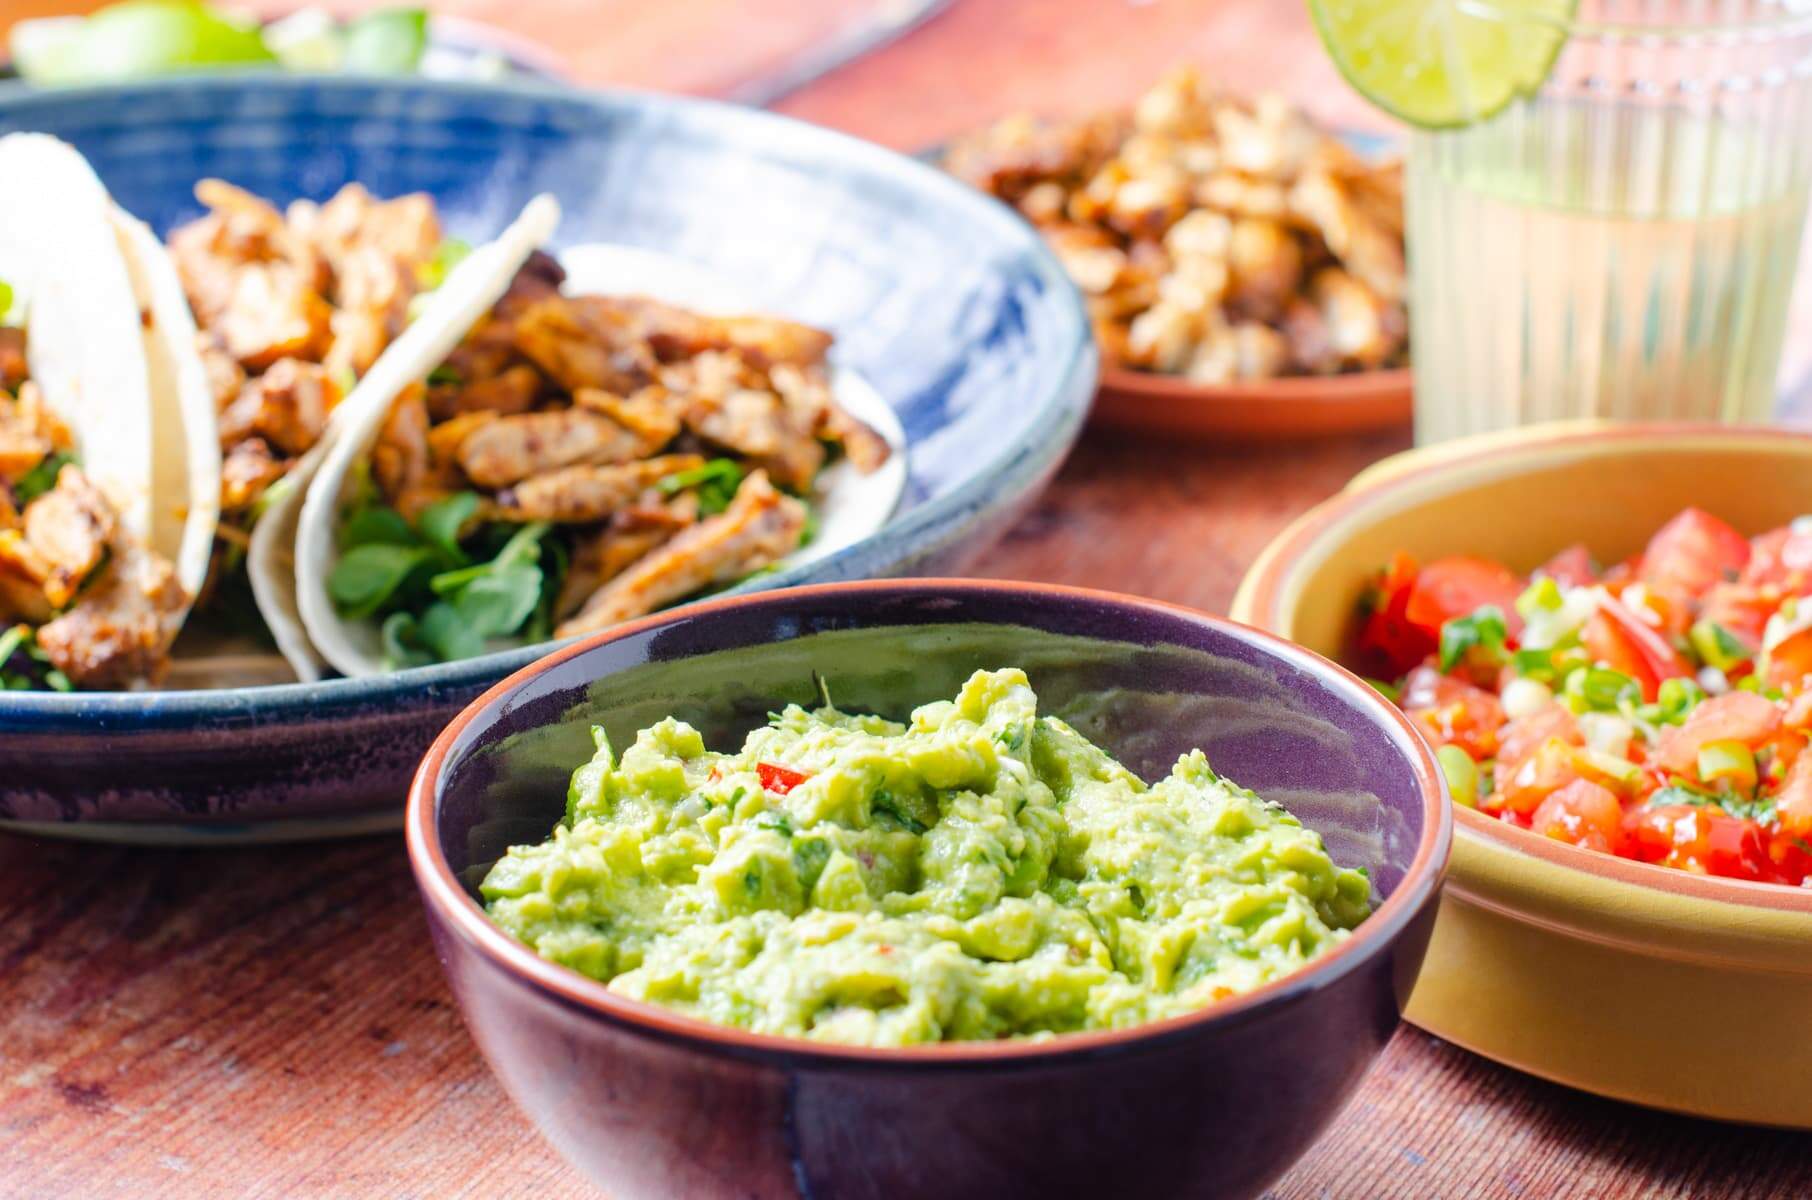 A dark wooden table set for a taco party with fresh guacamole in a purple bowl, fresh salsa to the side, chicken tacos made up and lime drinks in the back.